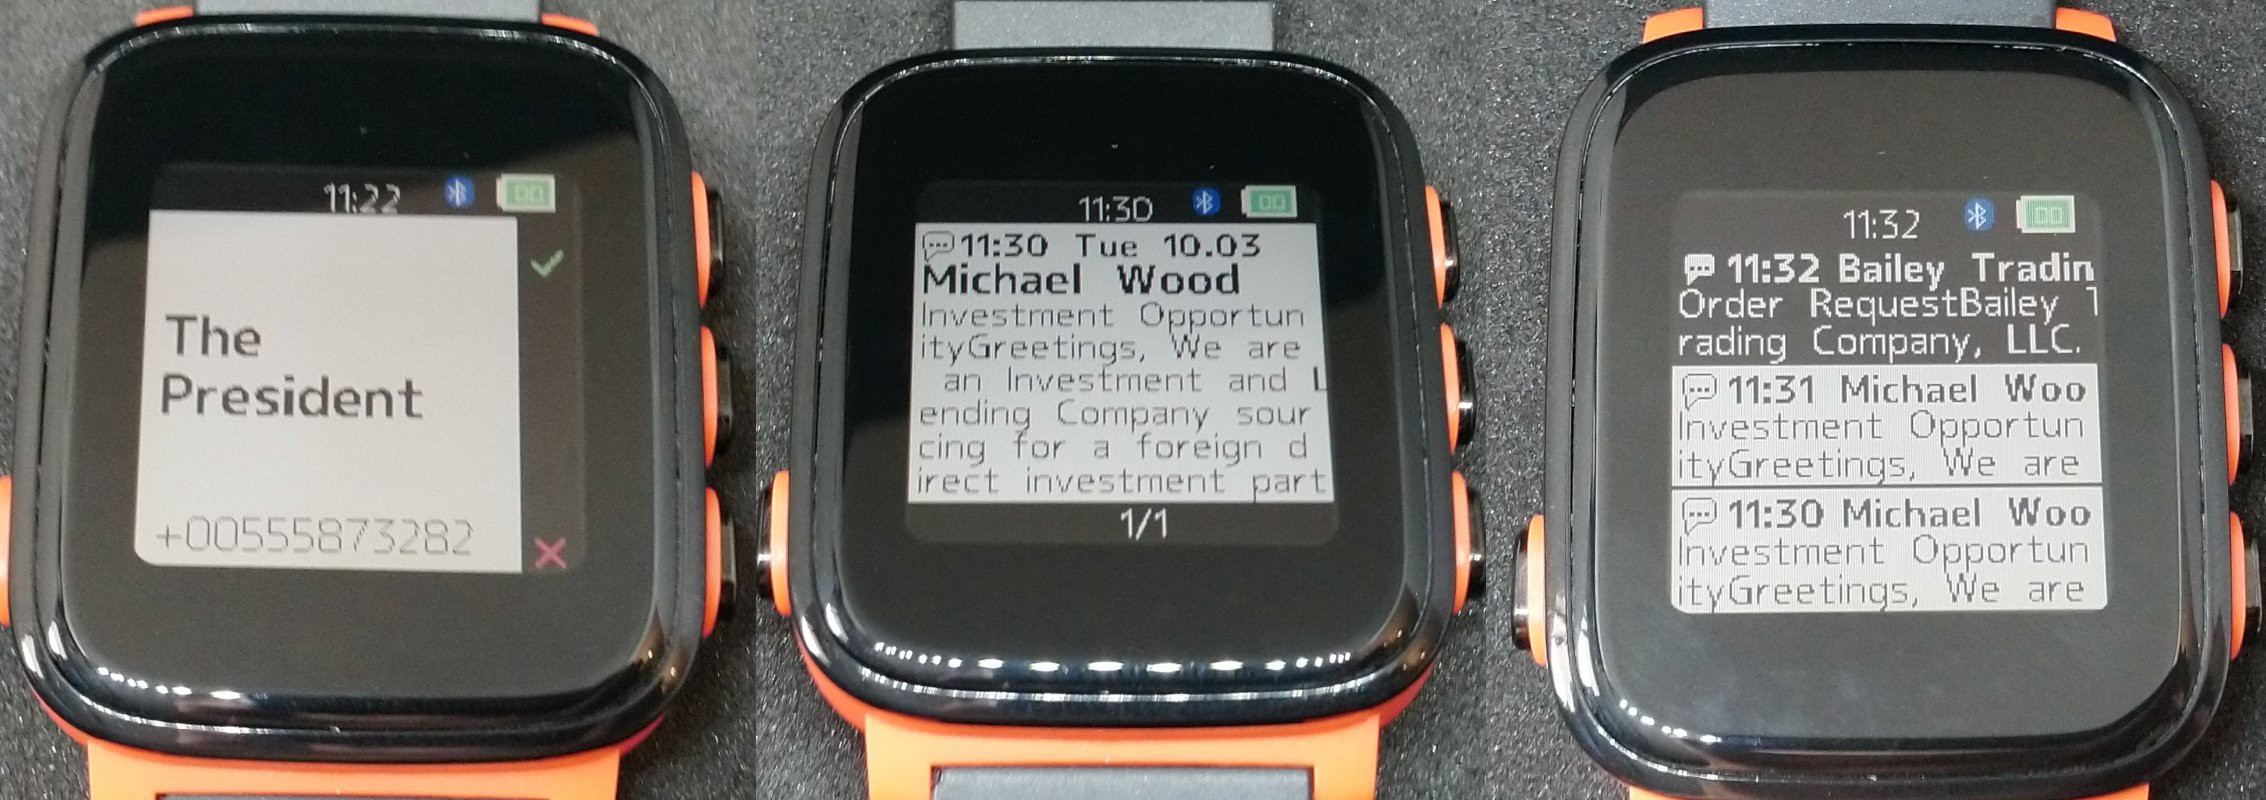 nRF52832 SW198 Fitness Tracker Notification of Message 